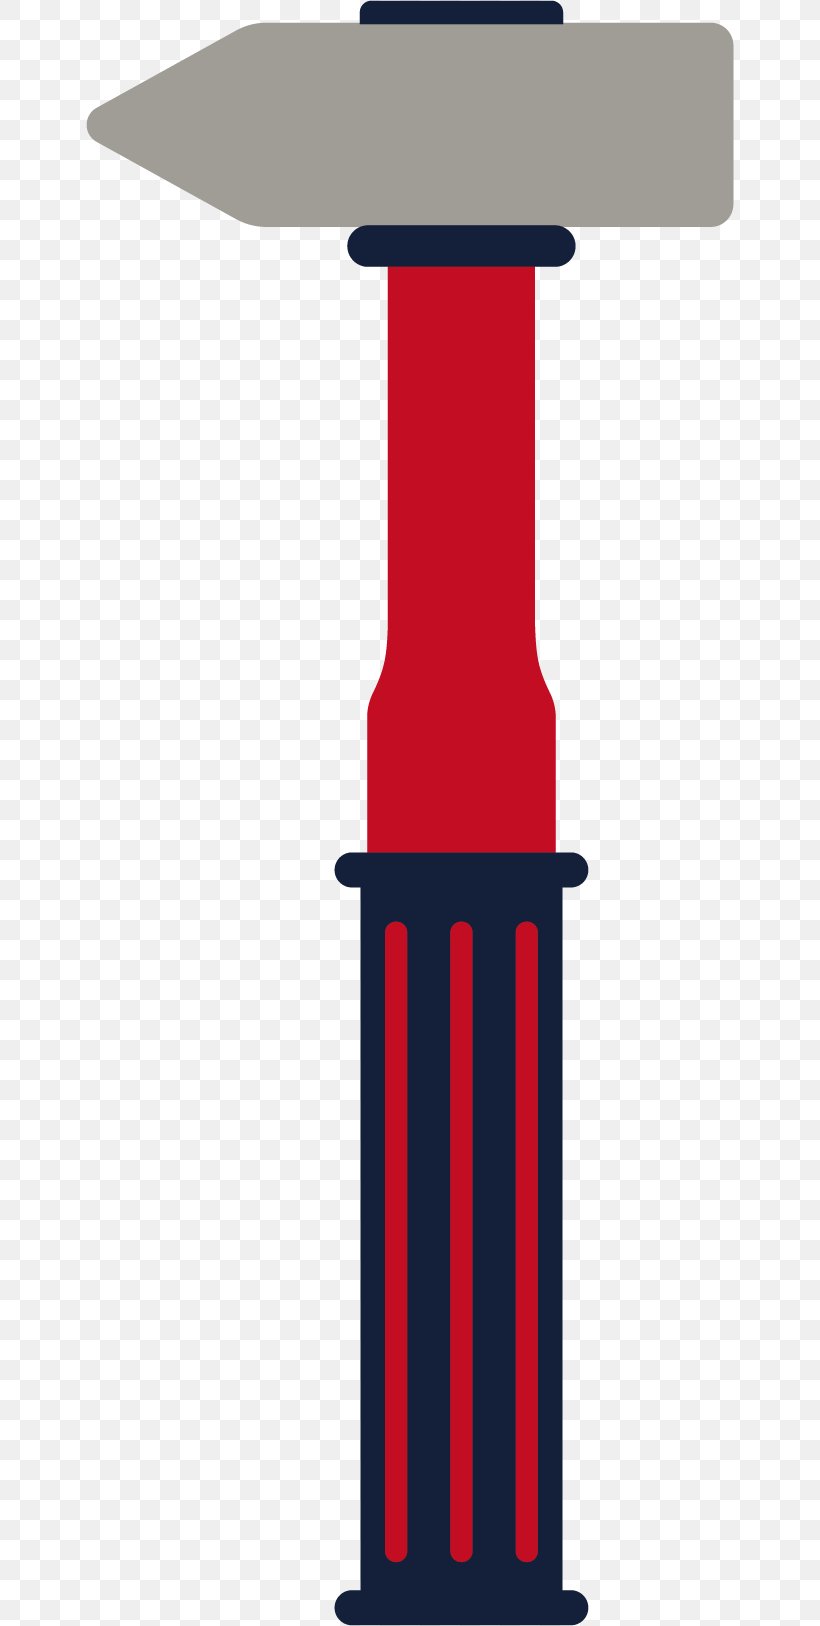 Hammer Tool Download, PNG, 648x1626px, Hammer, Google Images, Metal, Red, Search Engine Download Free